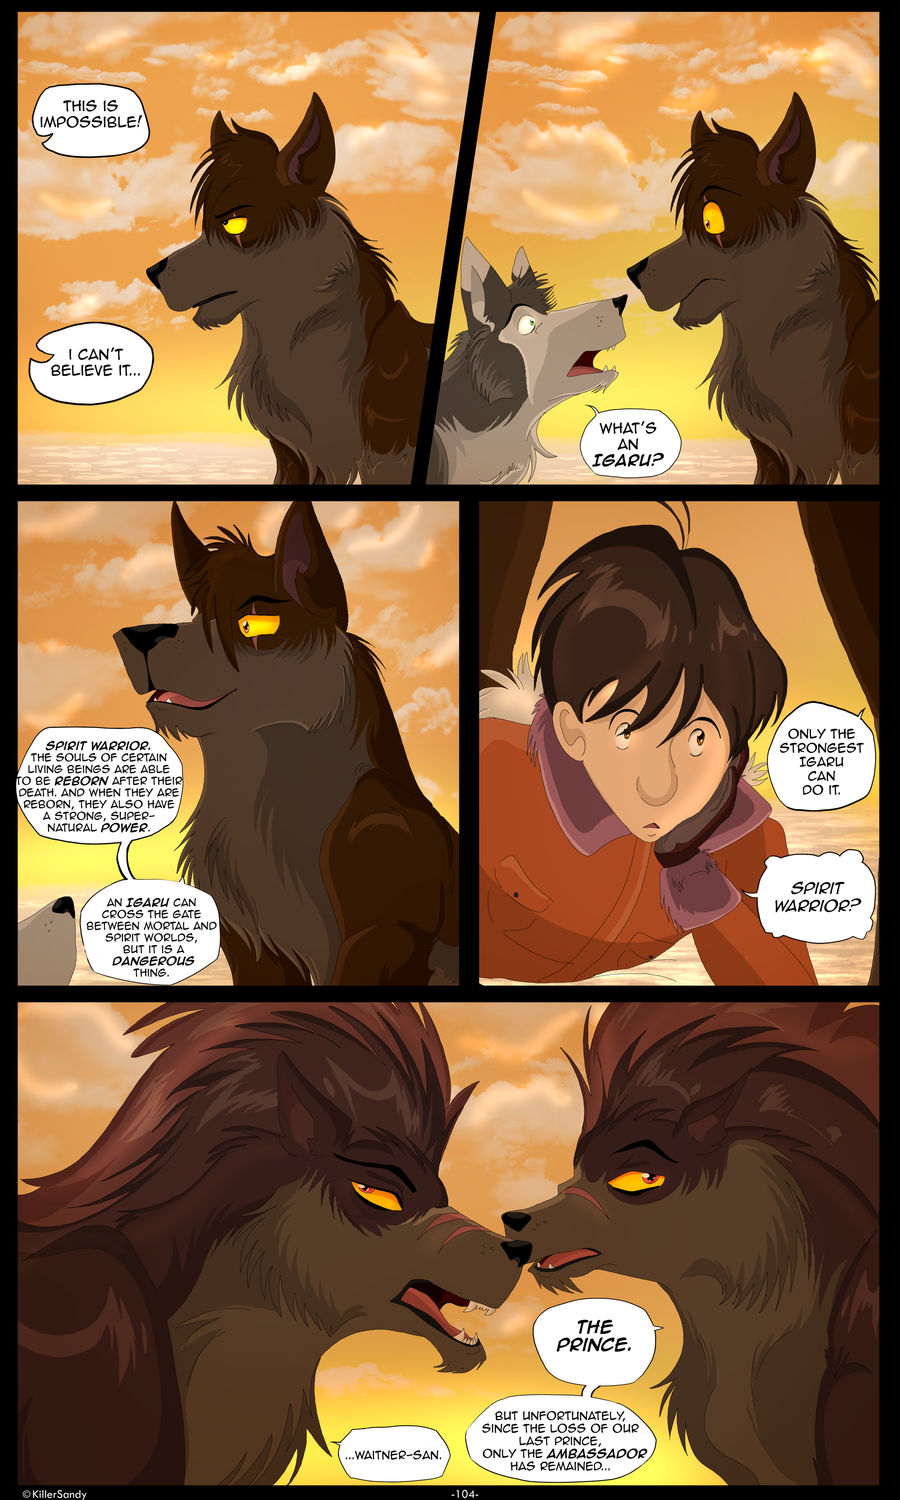 The Prince of the Moonlight Stone page 104